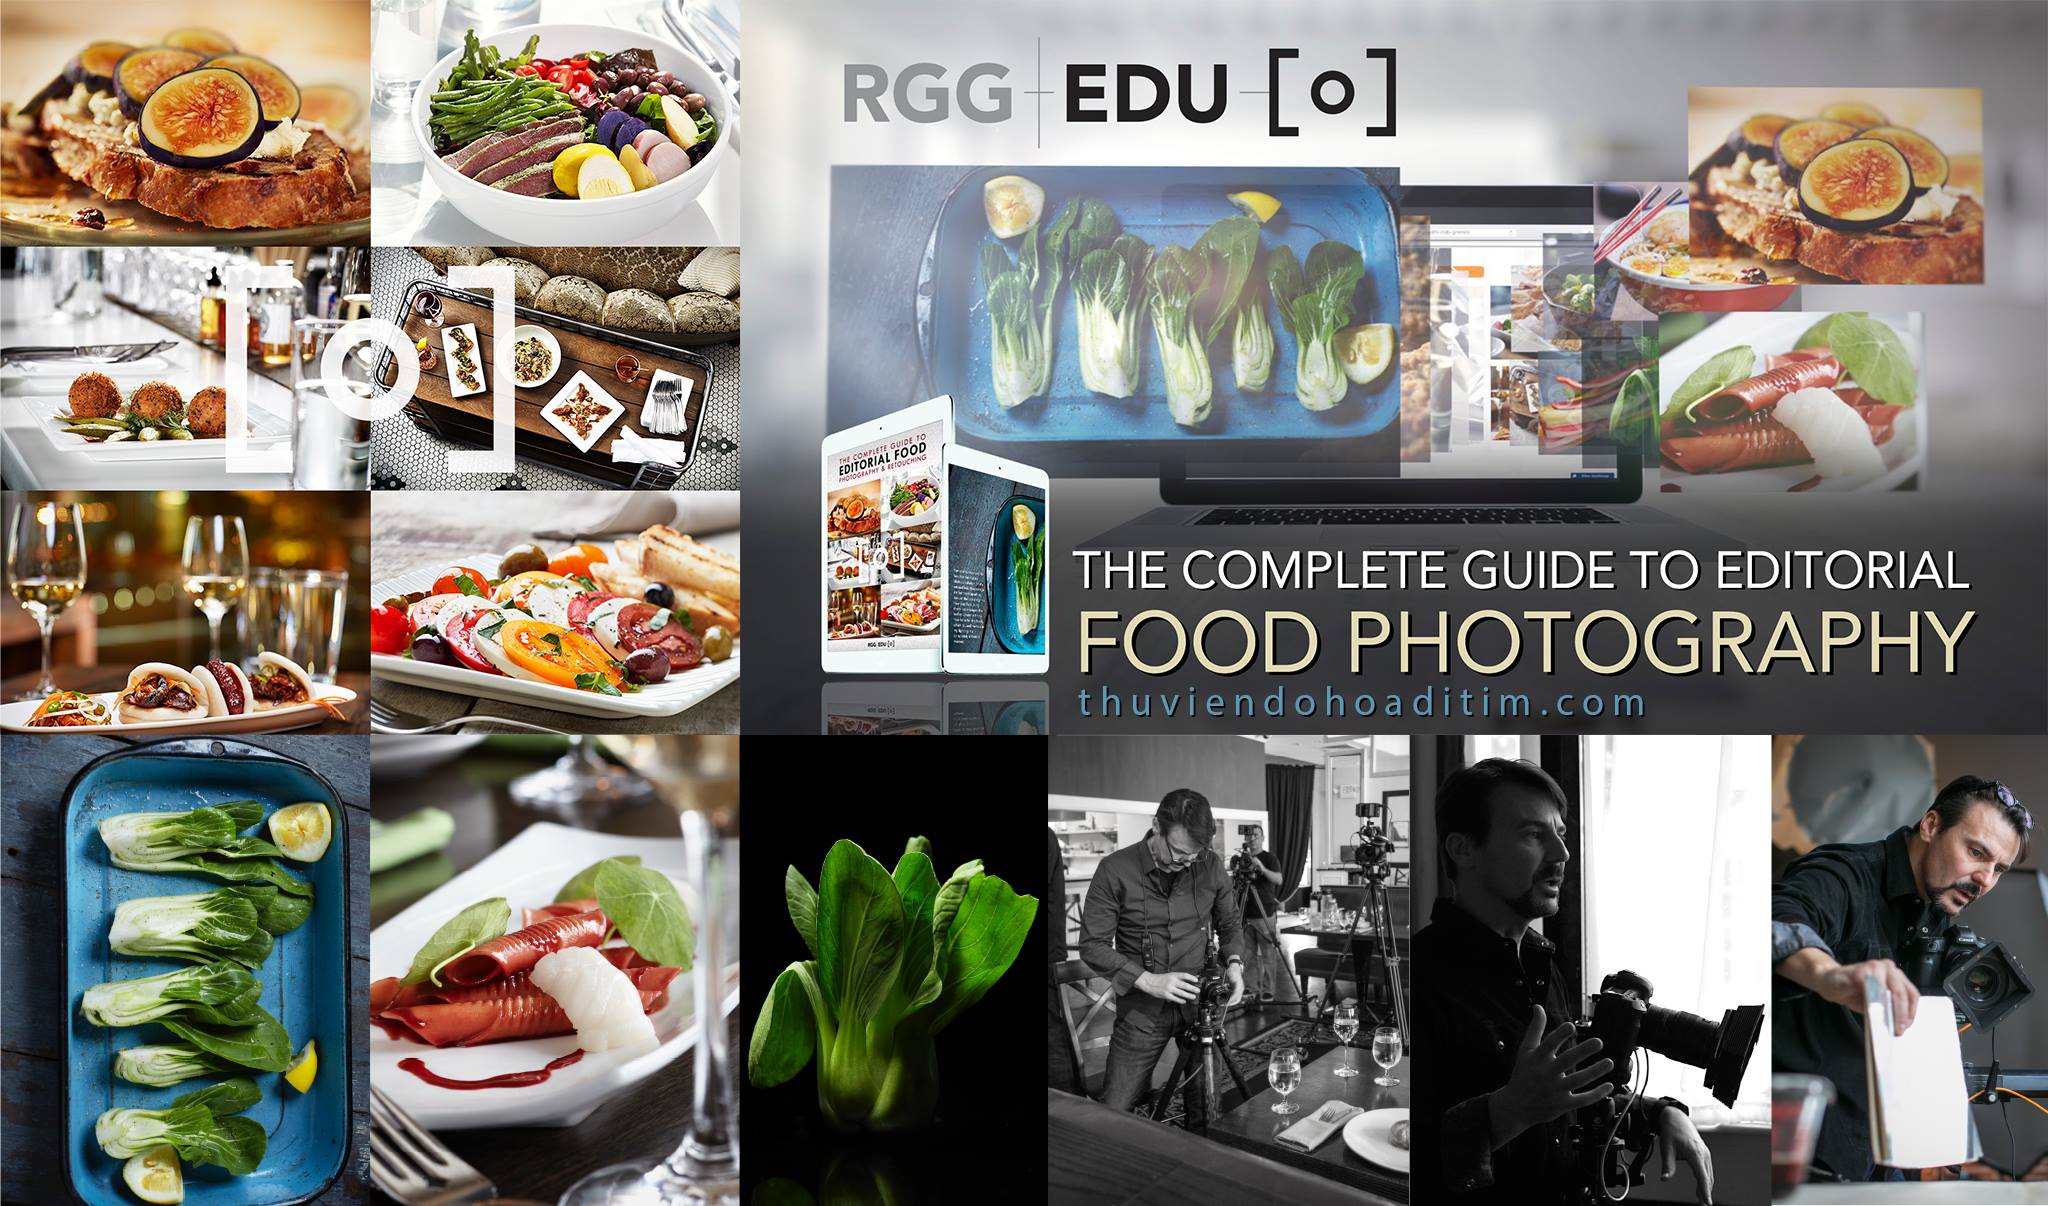 [ Tutorials ] RGGEDU - The Complete Guide To Editorial Food Photography & Photoshop Retouching